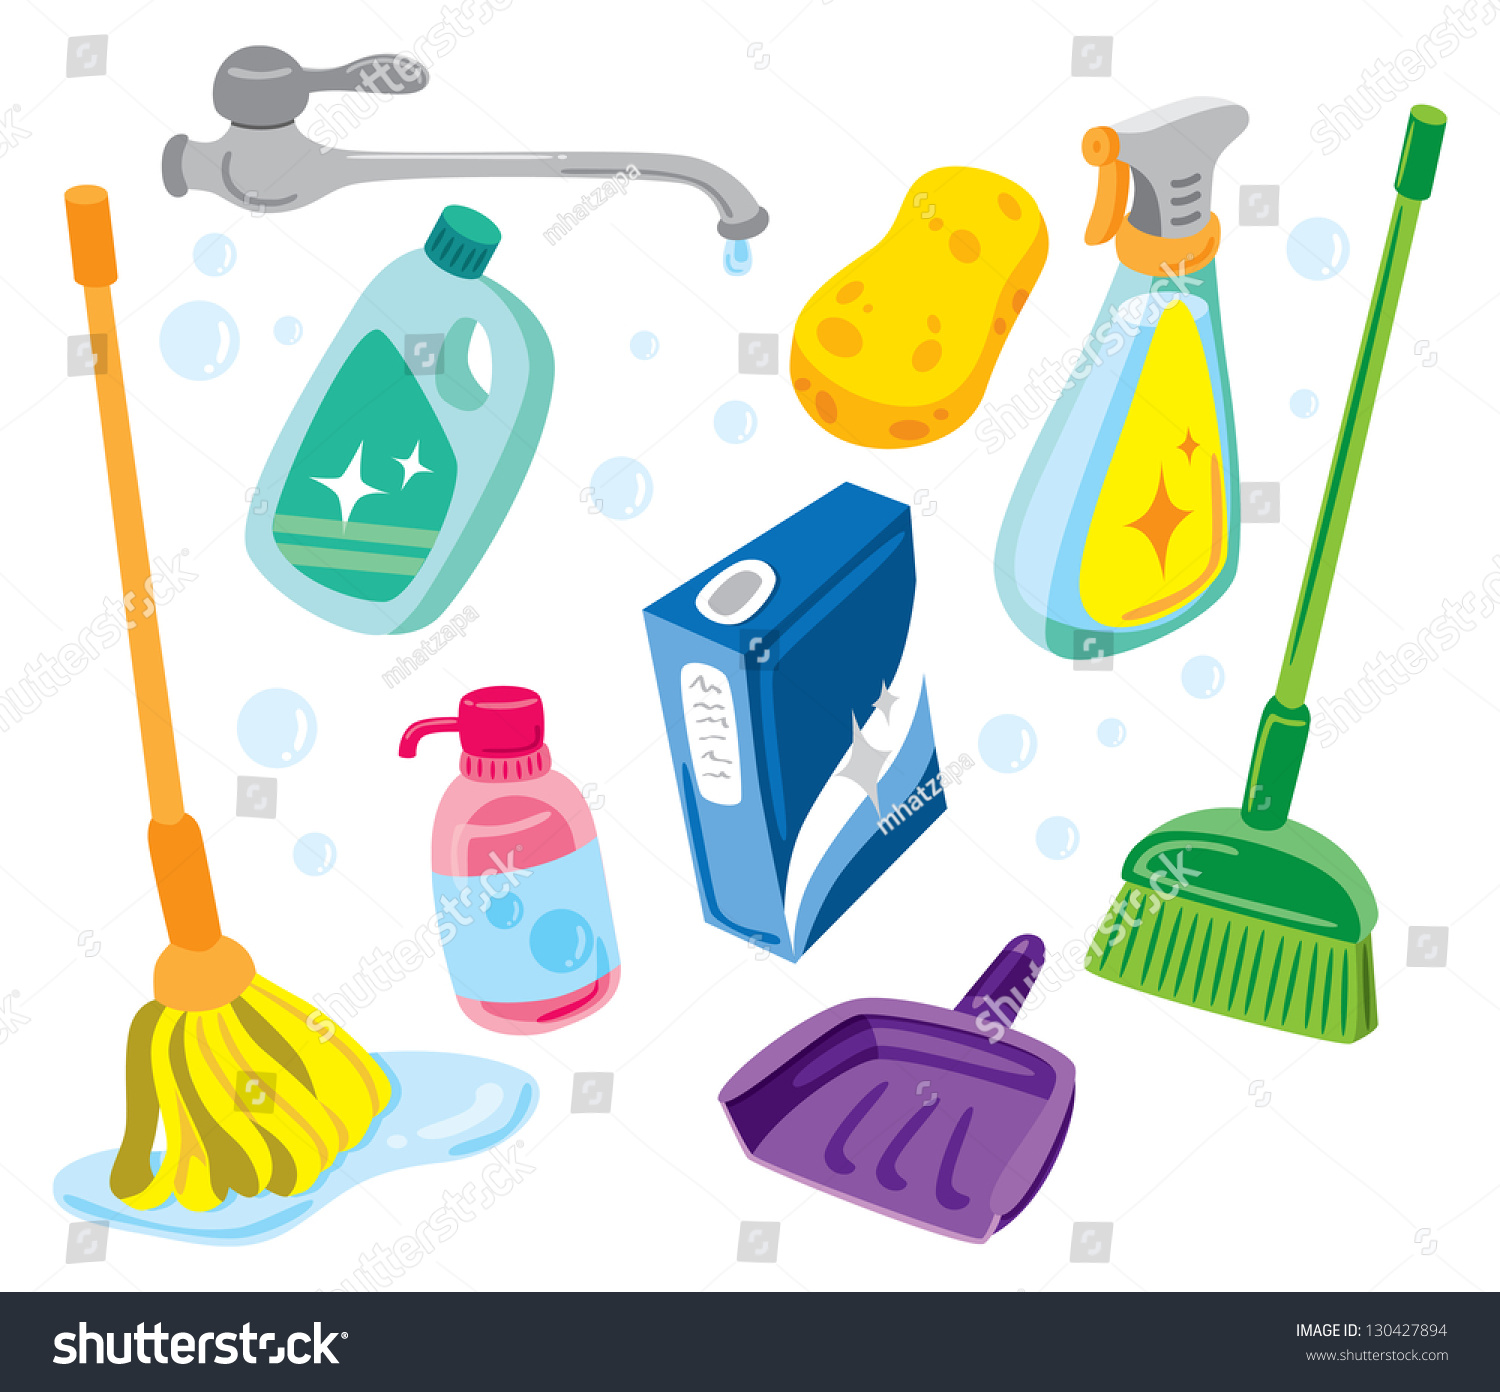 toilet cleaning clipart - photo #40